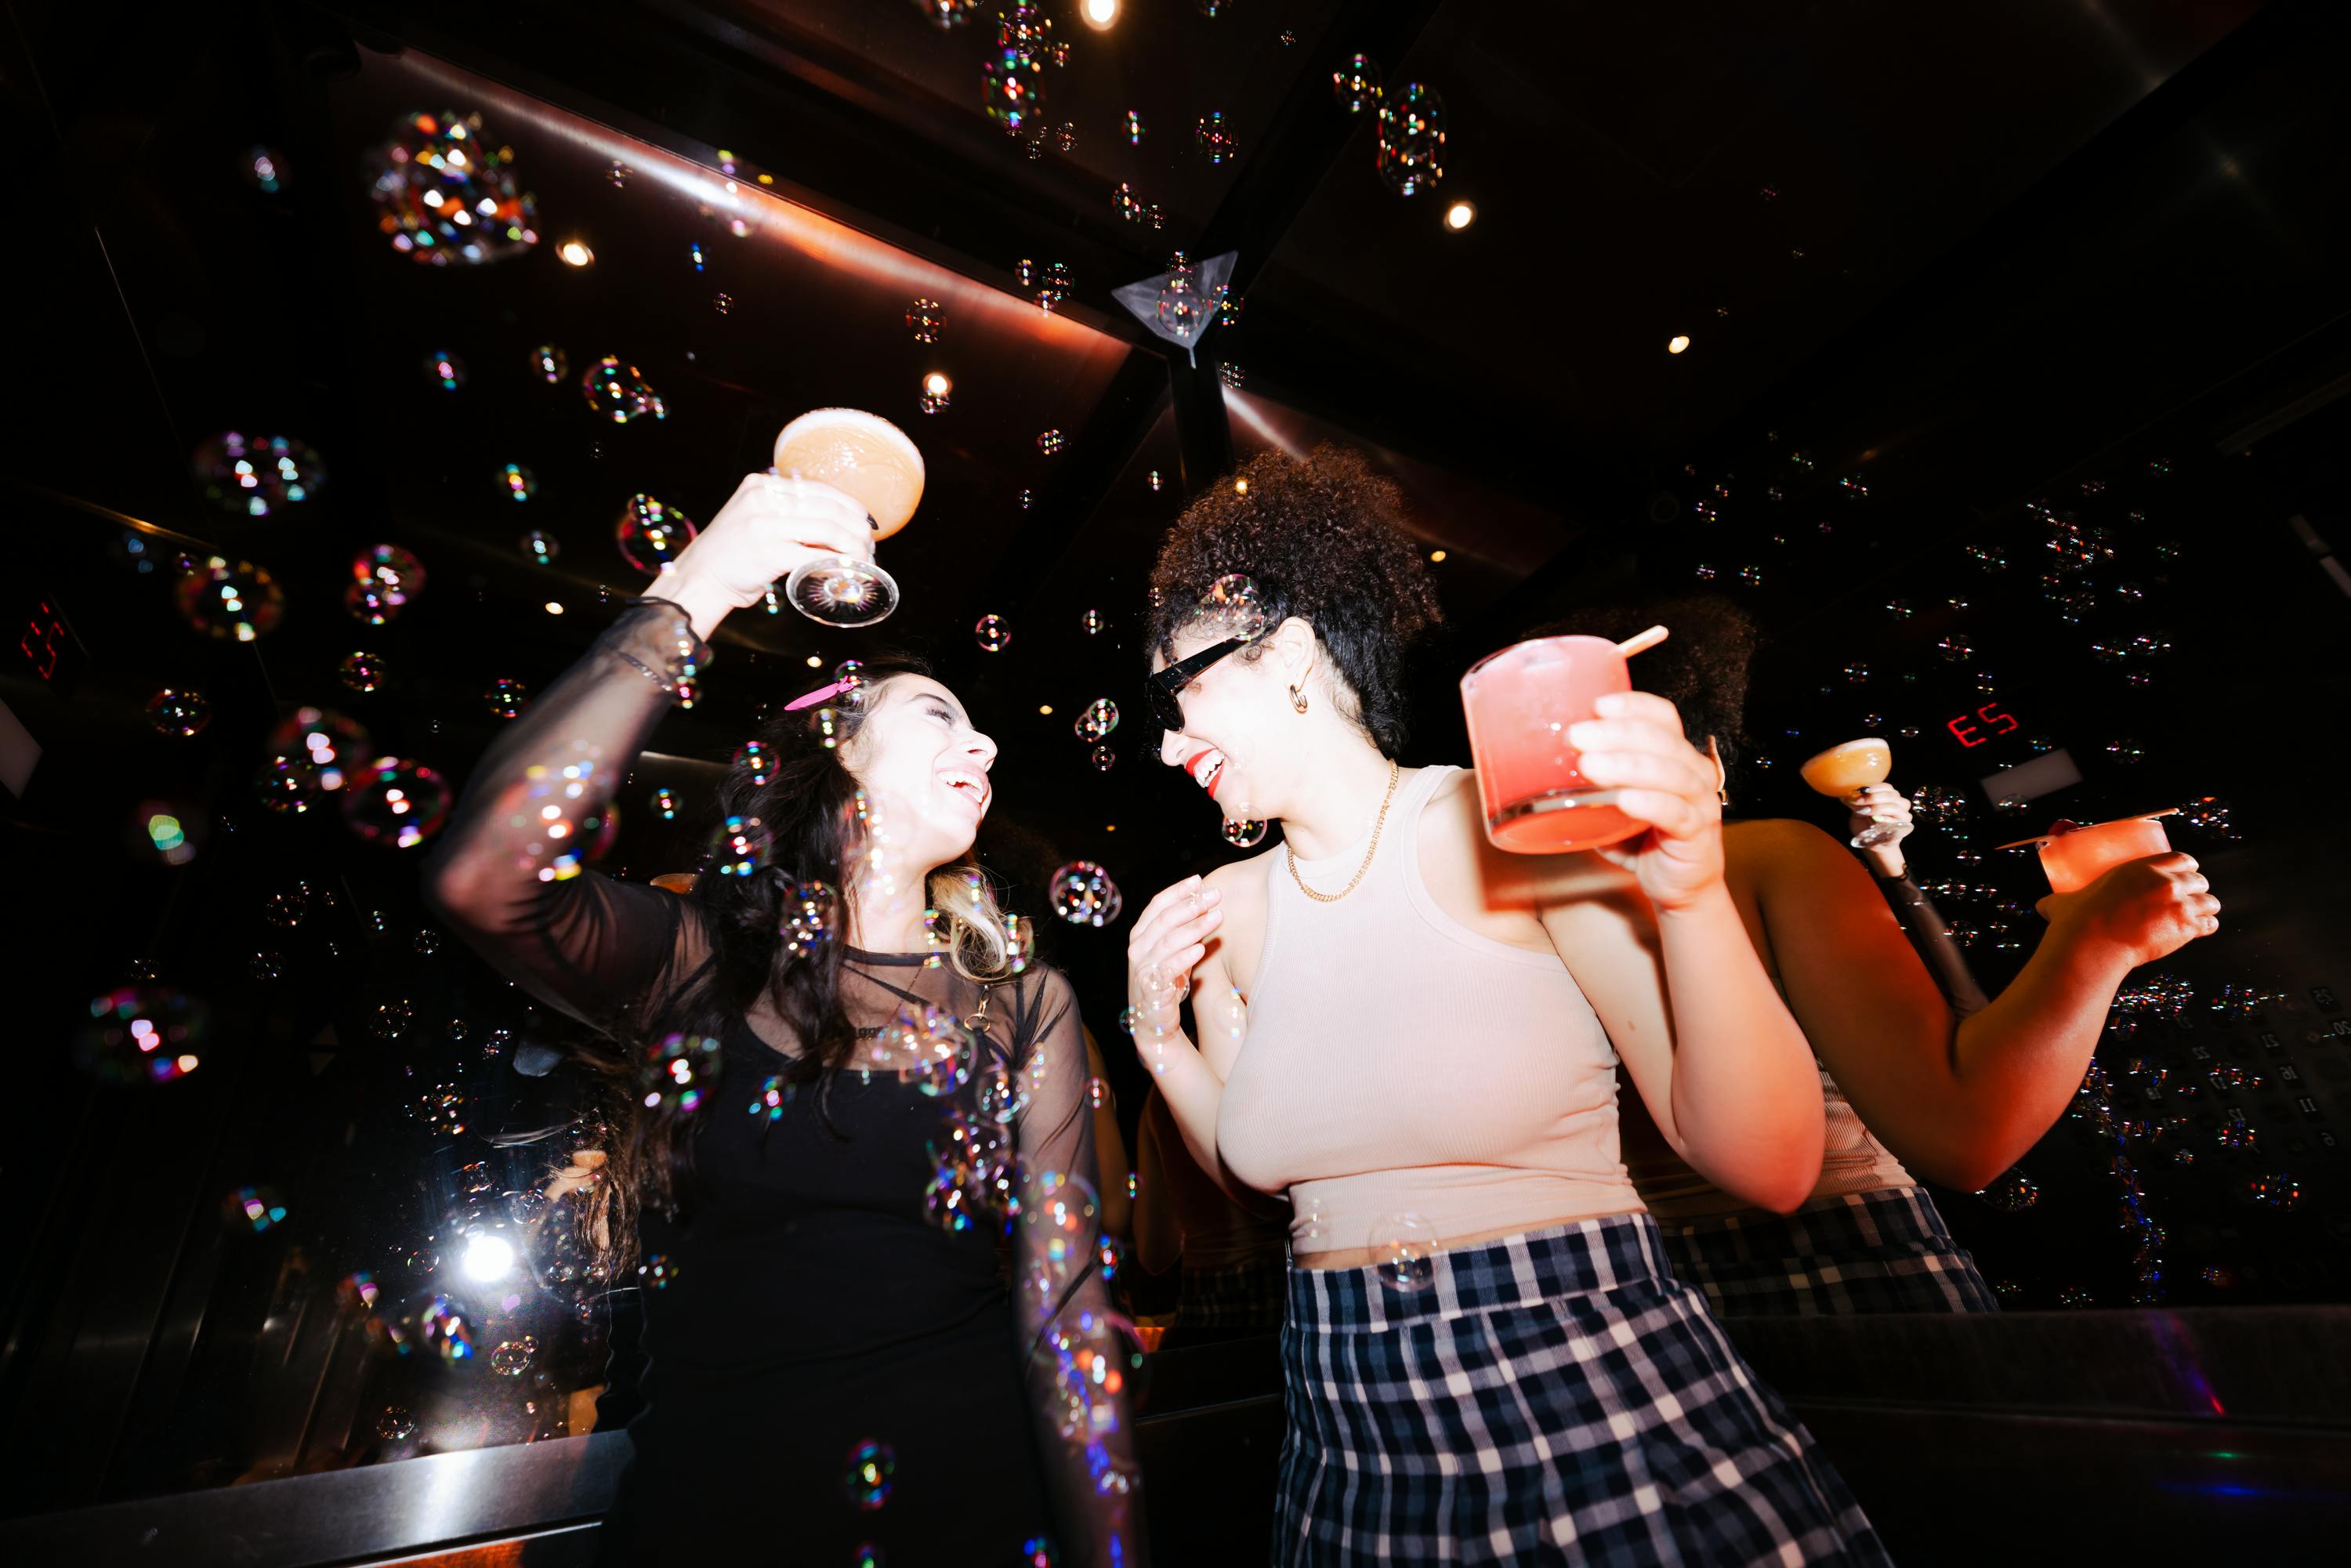 Two girls holding cocktails while dancing in a club surrounded by bubbles